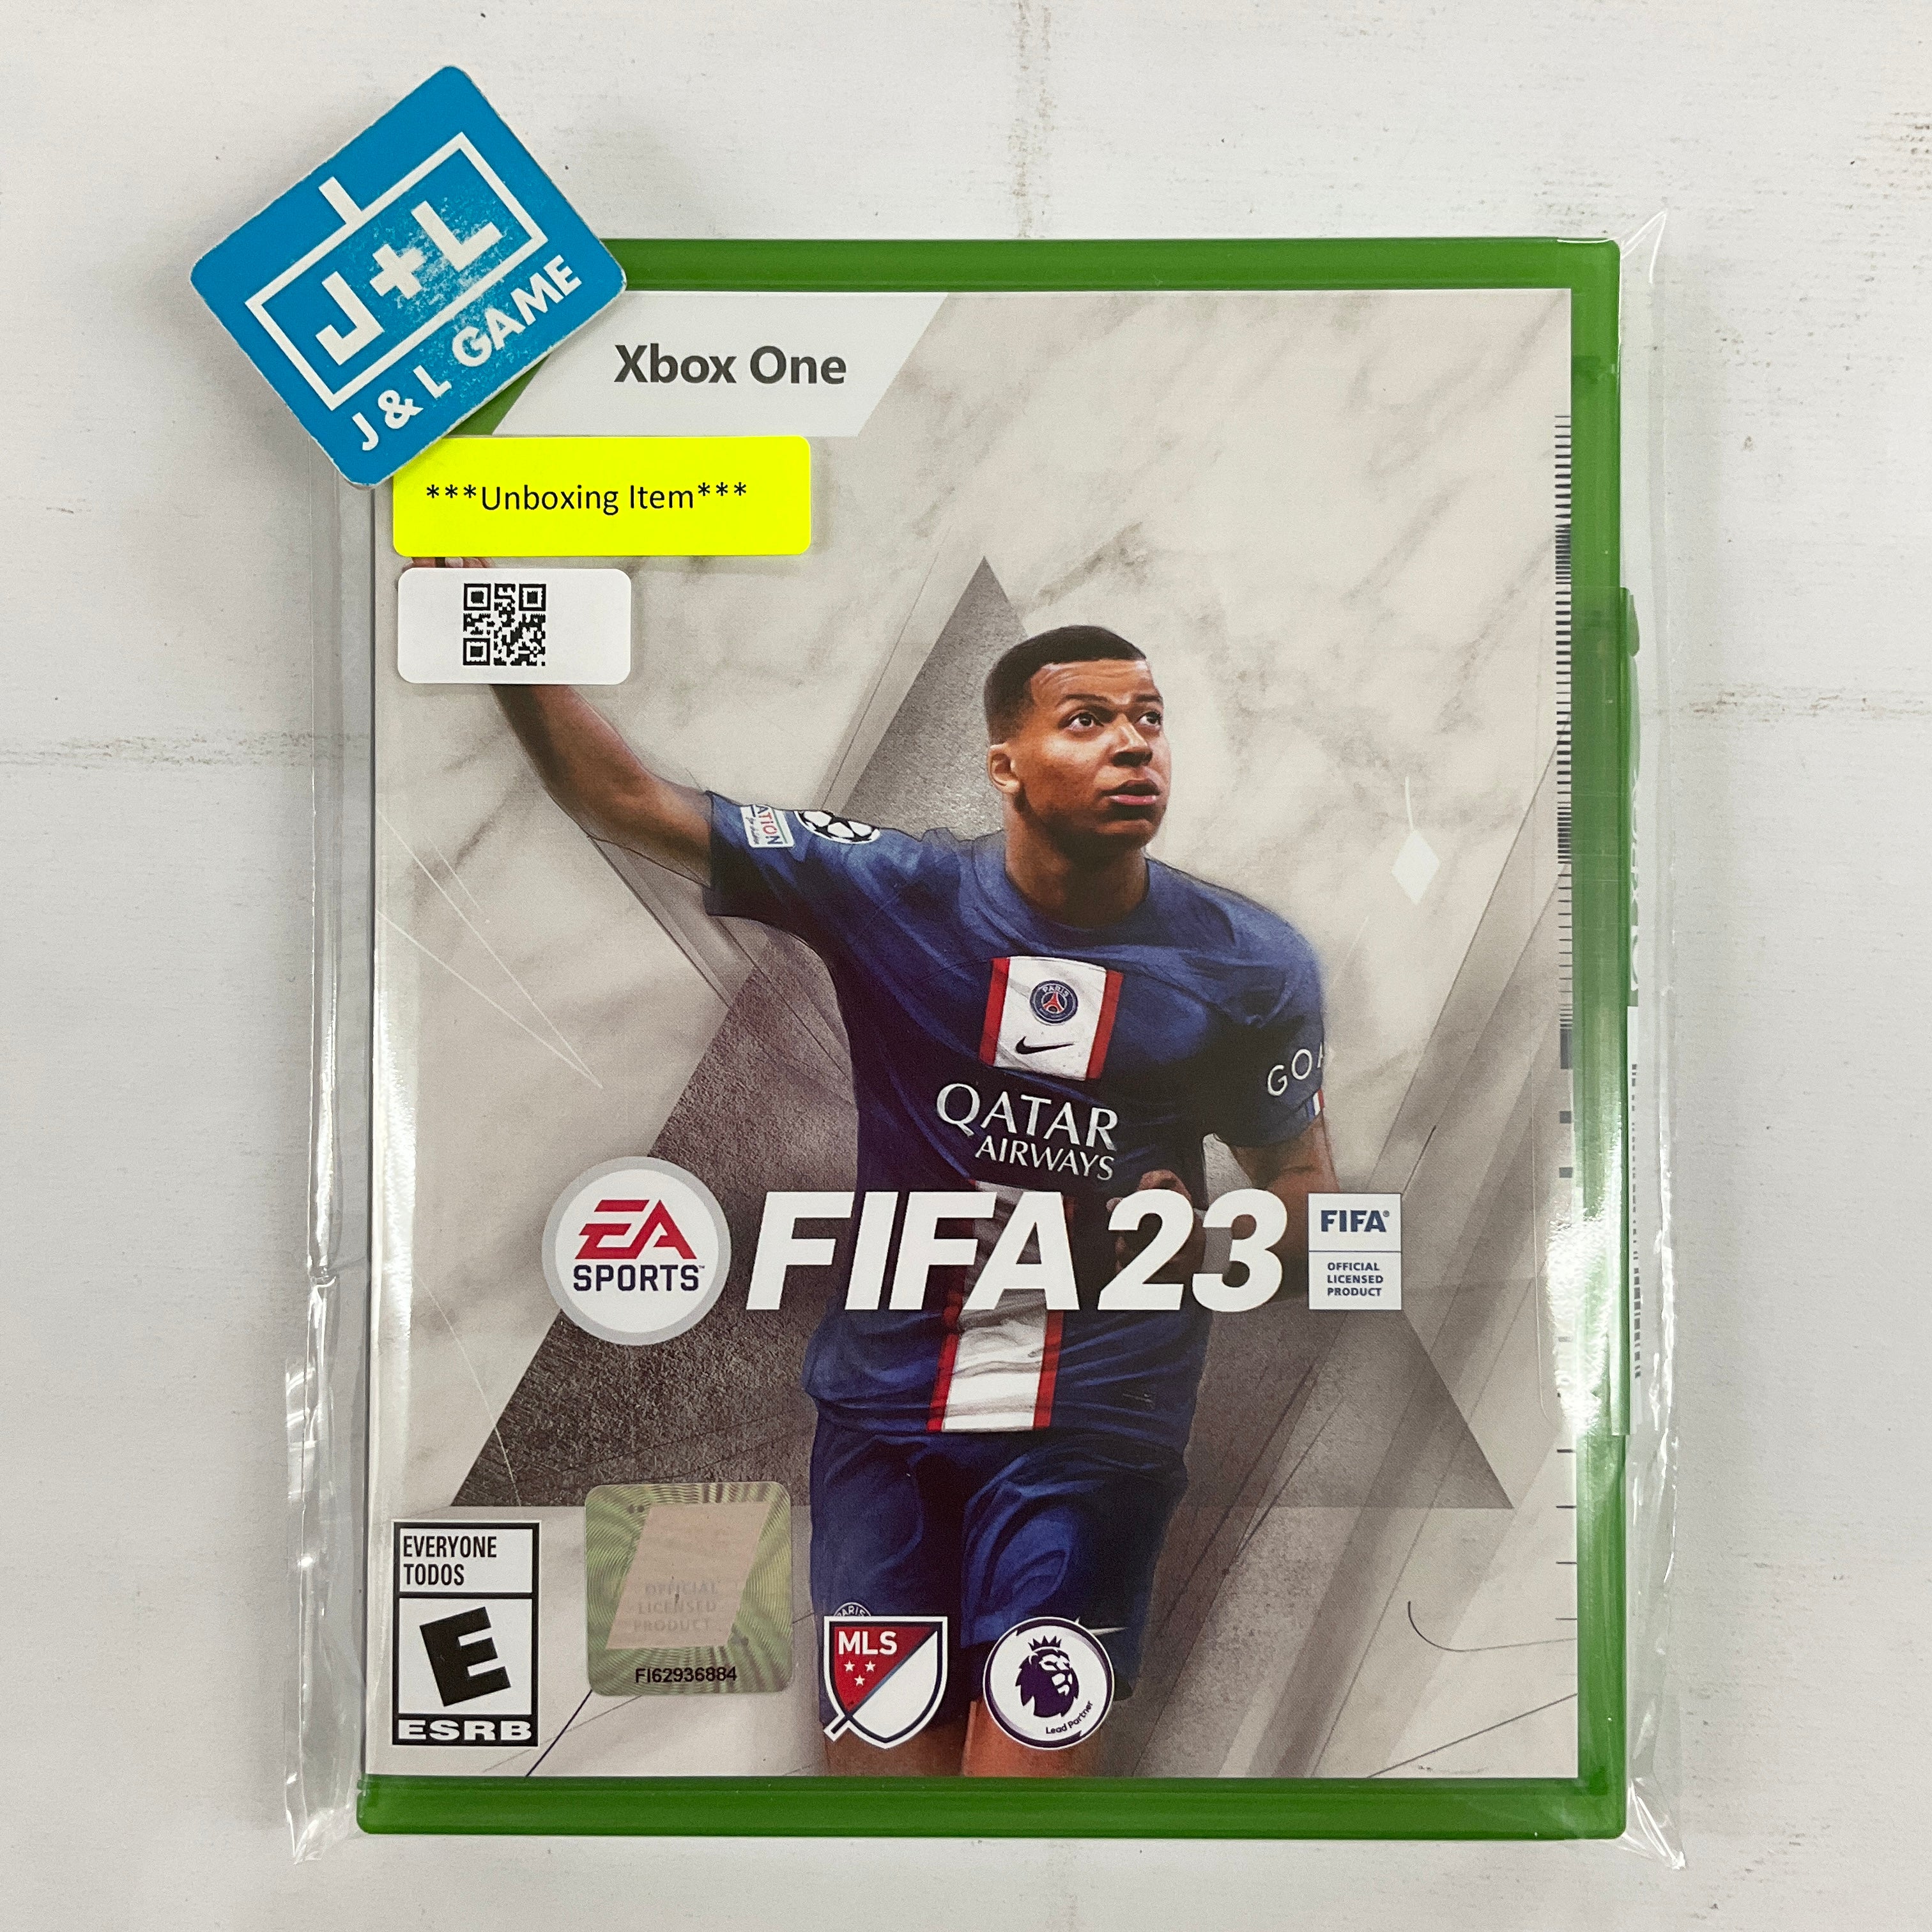 FIFA 23 - (XB1) Xbox One [UNBOXING] Video Games Electronic Arts   